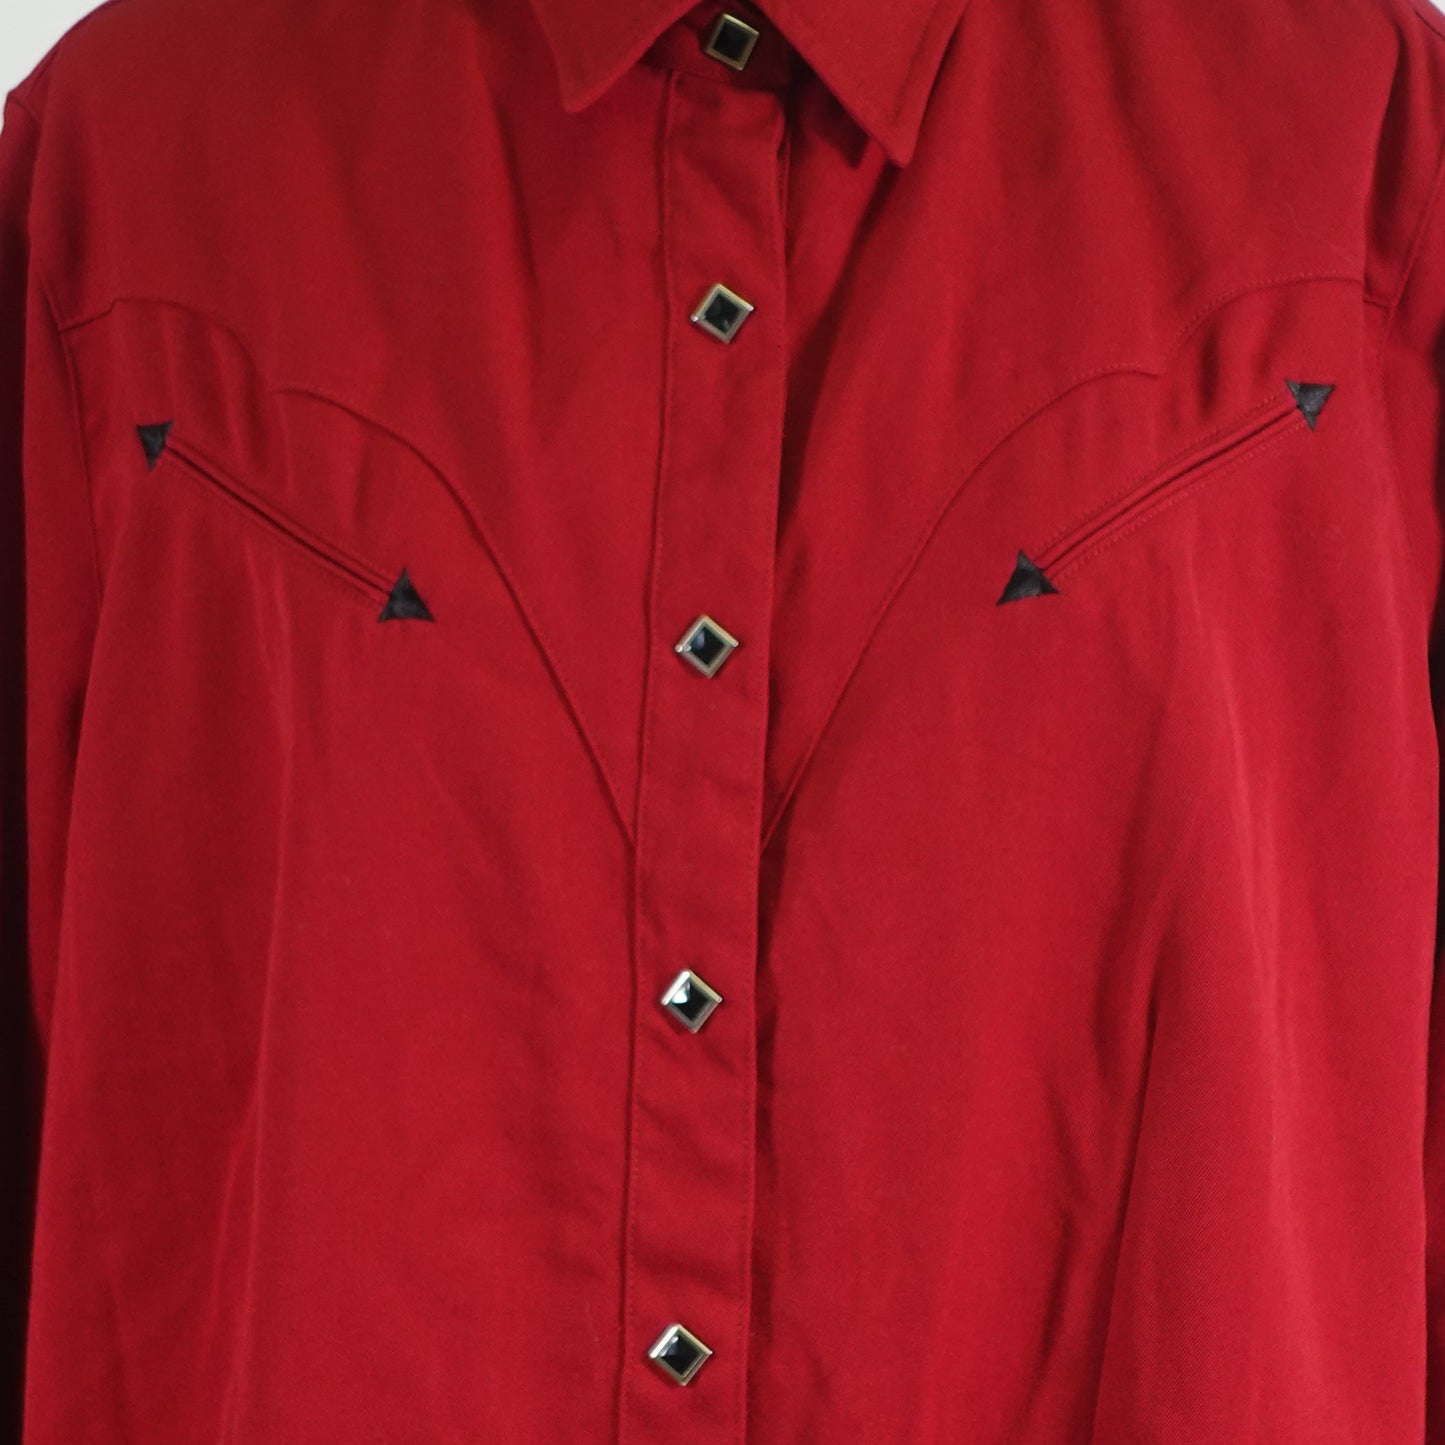 Vintage Red Western Button Up Top